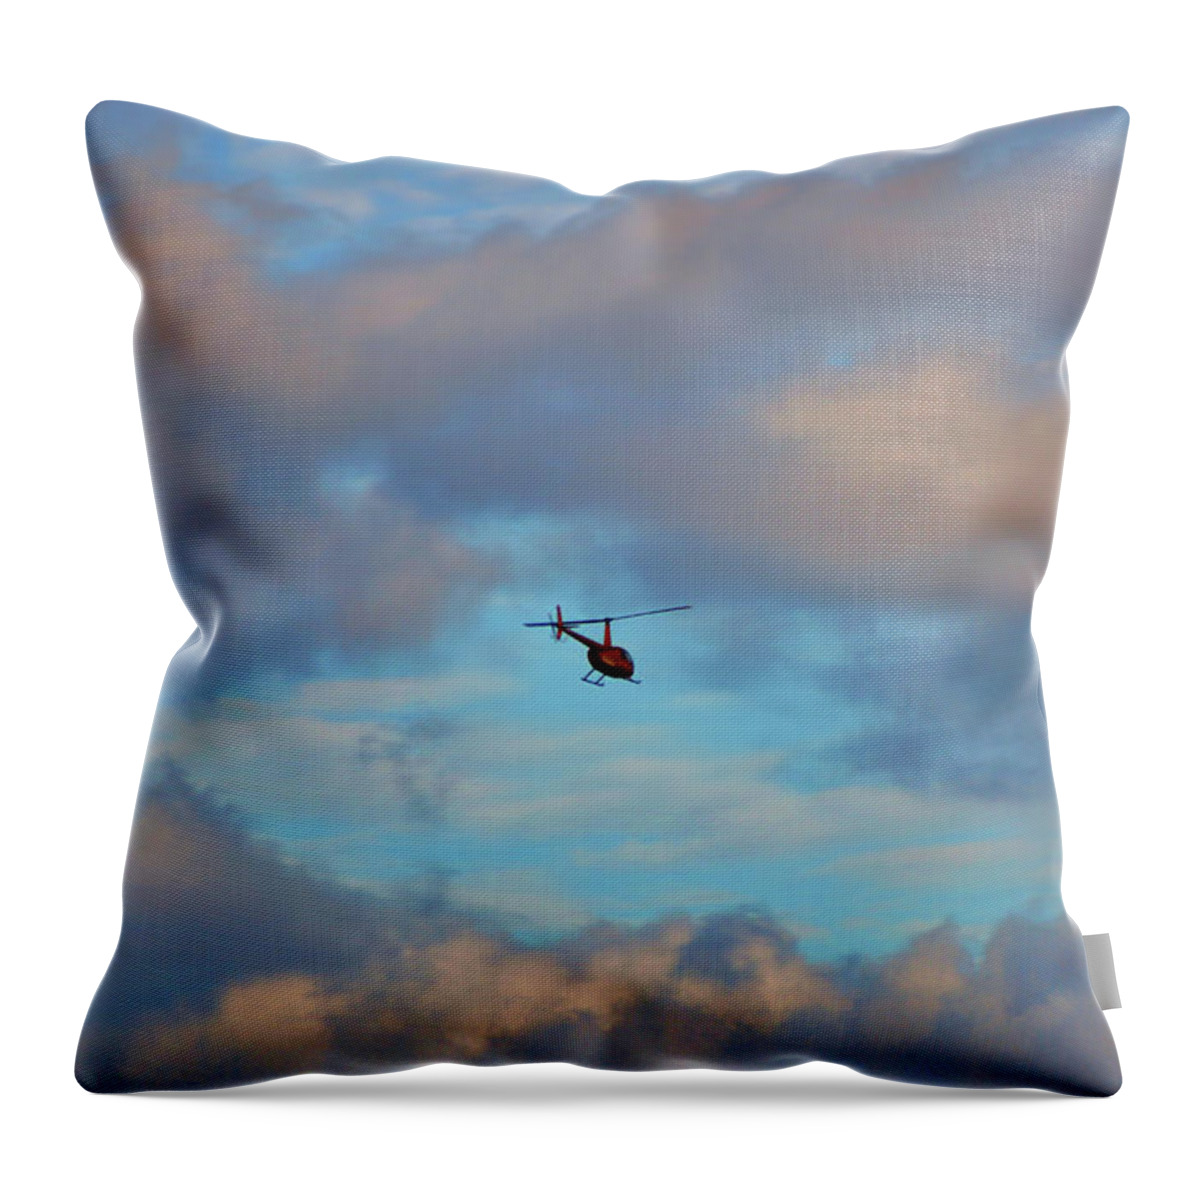 Helicopter Throw Pillow featuring the digital art 41- Into The Blue by Joseph Keane